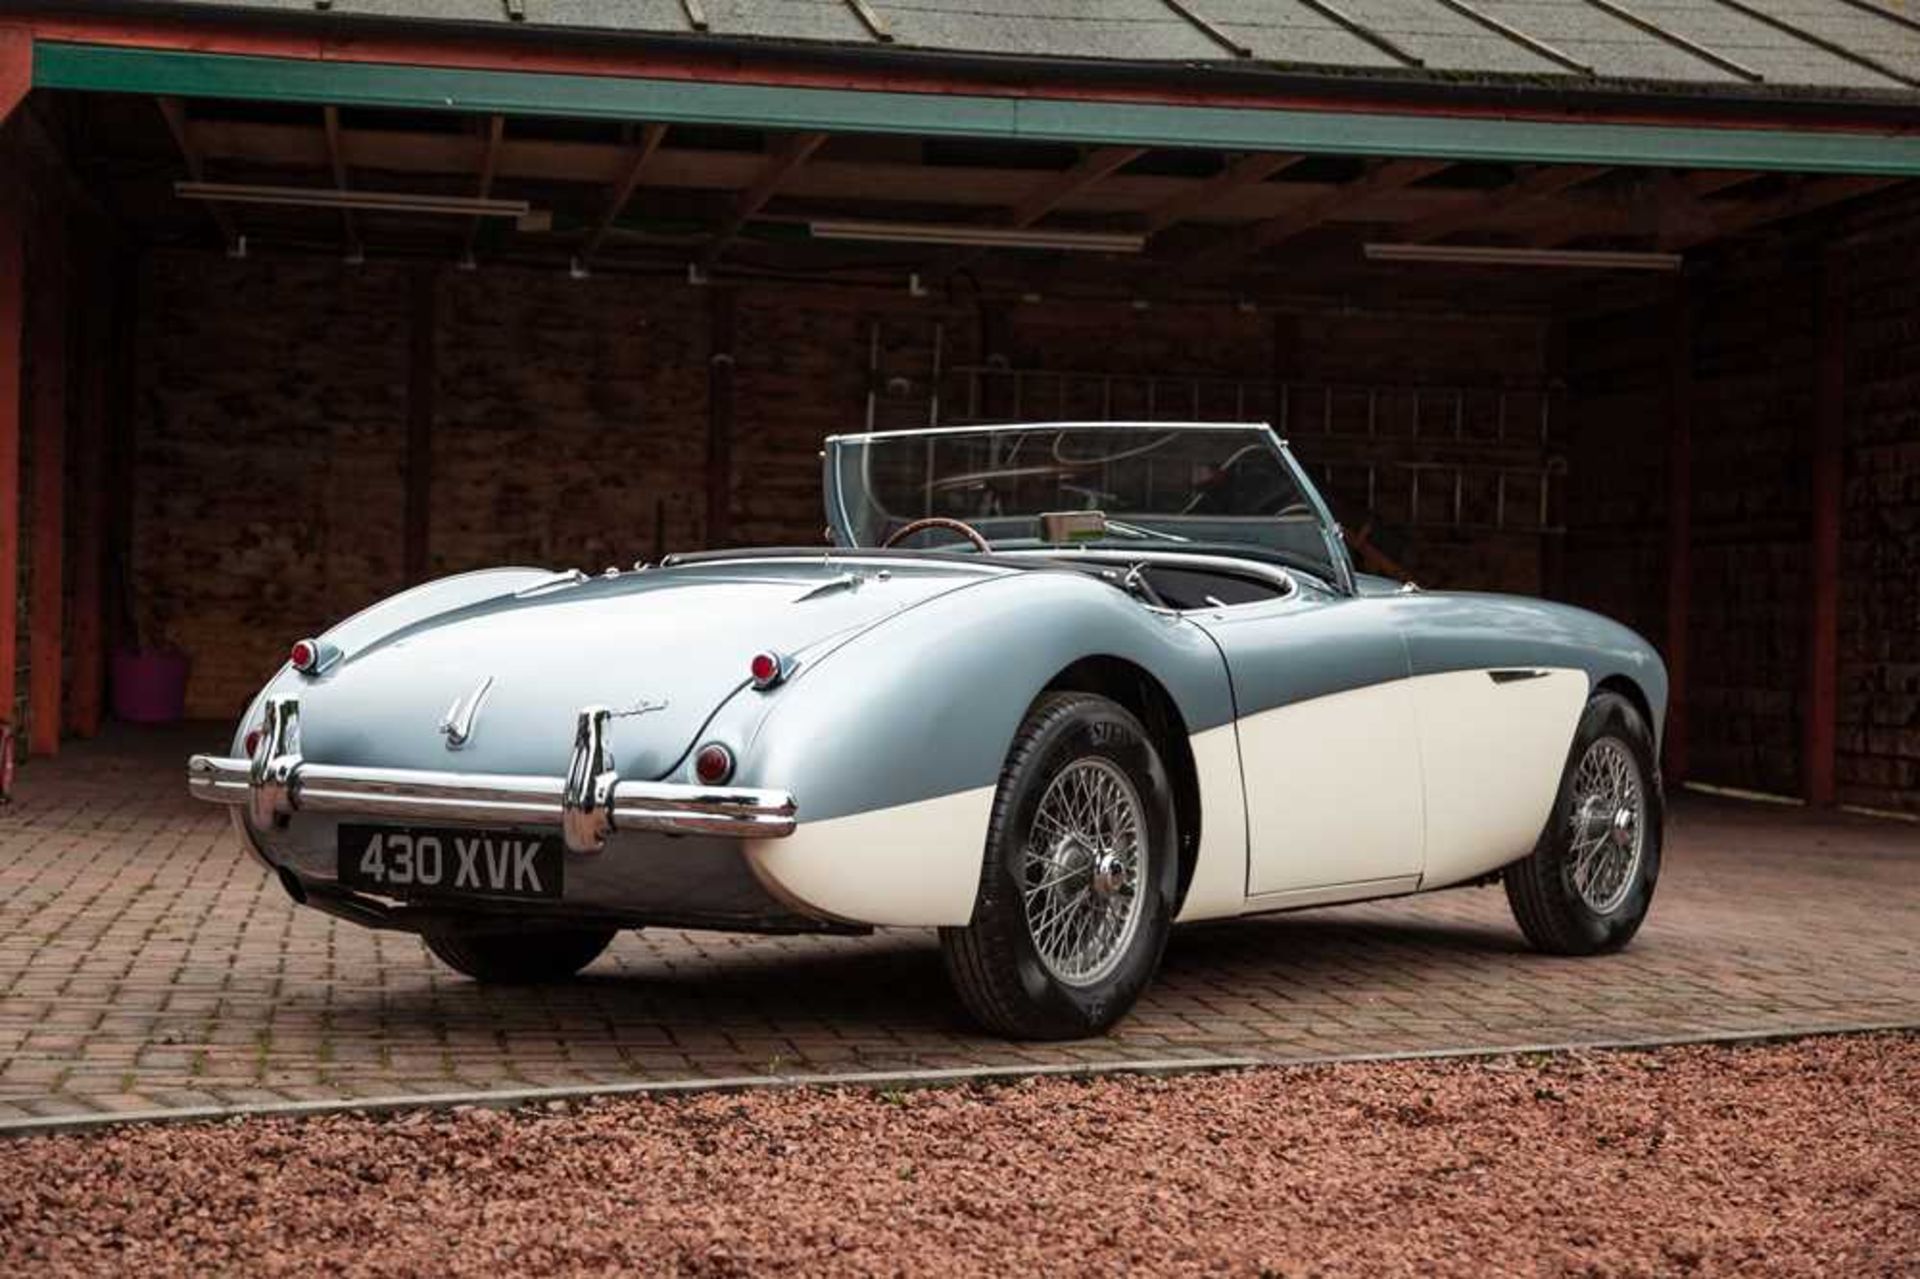 1955 Austin-Healey 100/4 Subtly Upgraded with 5-Speed Transmission and Front Disc Brakes - Image 2 of 54